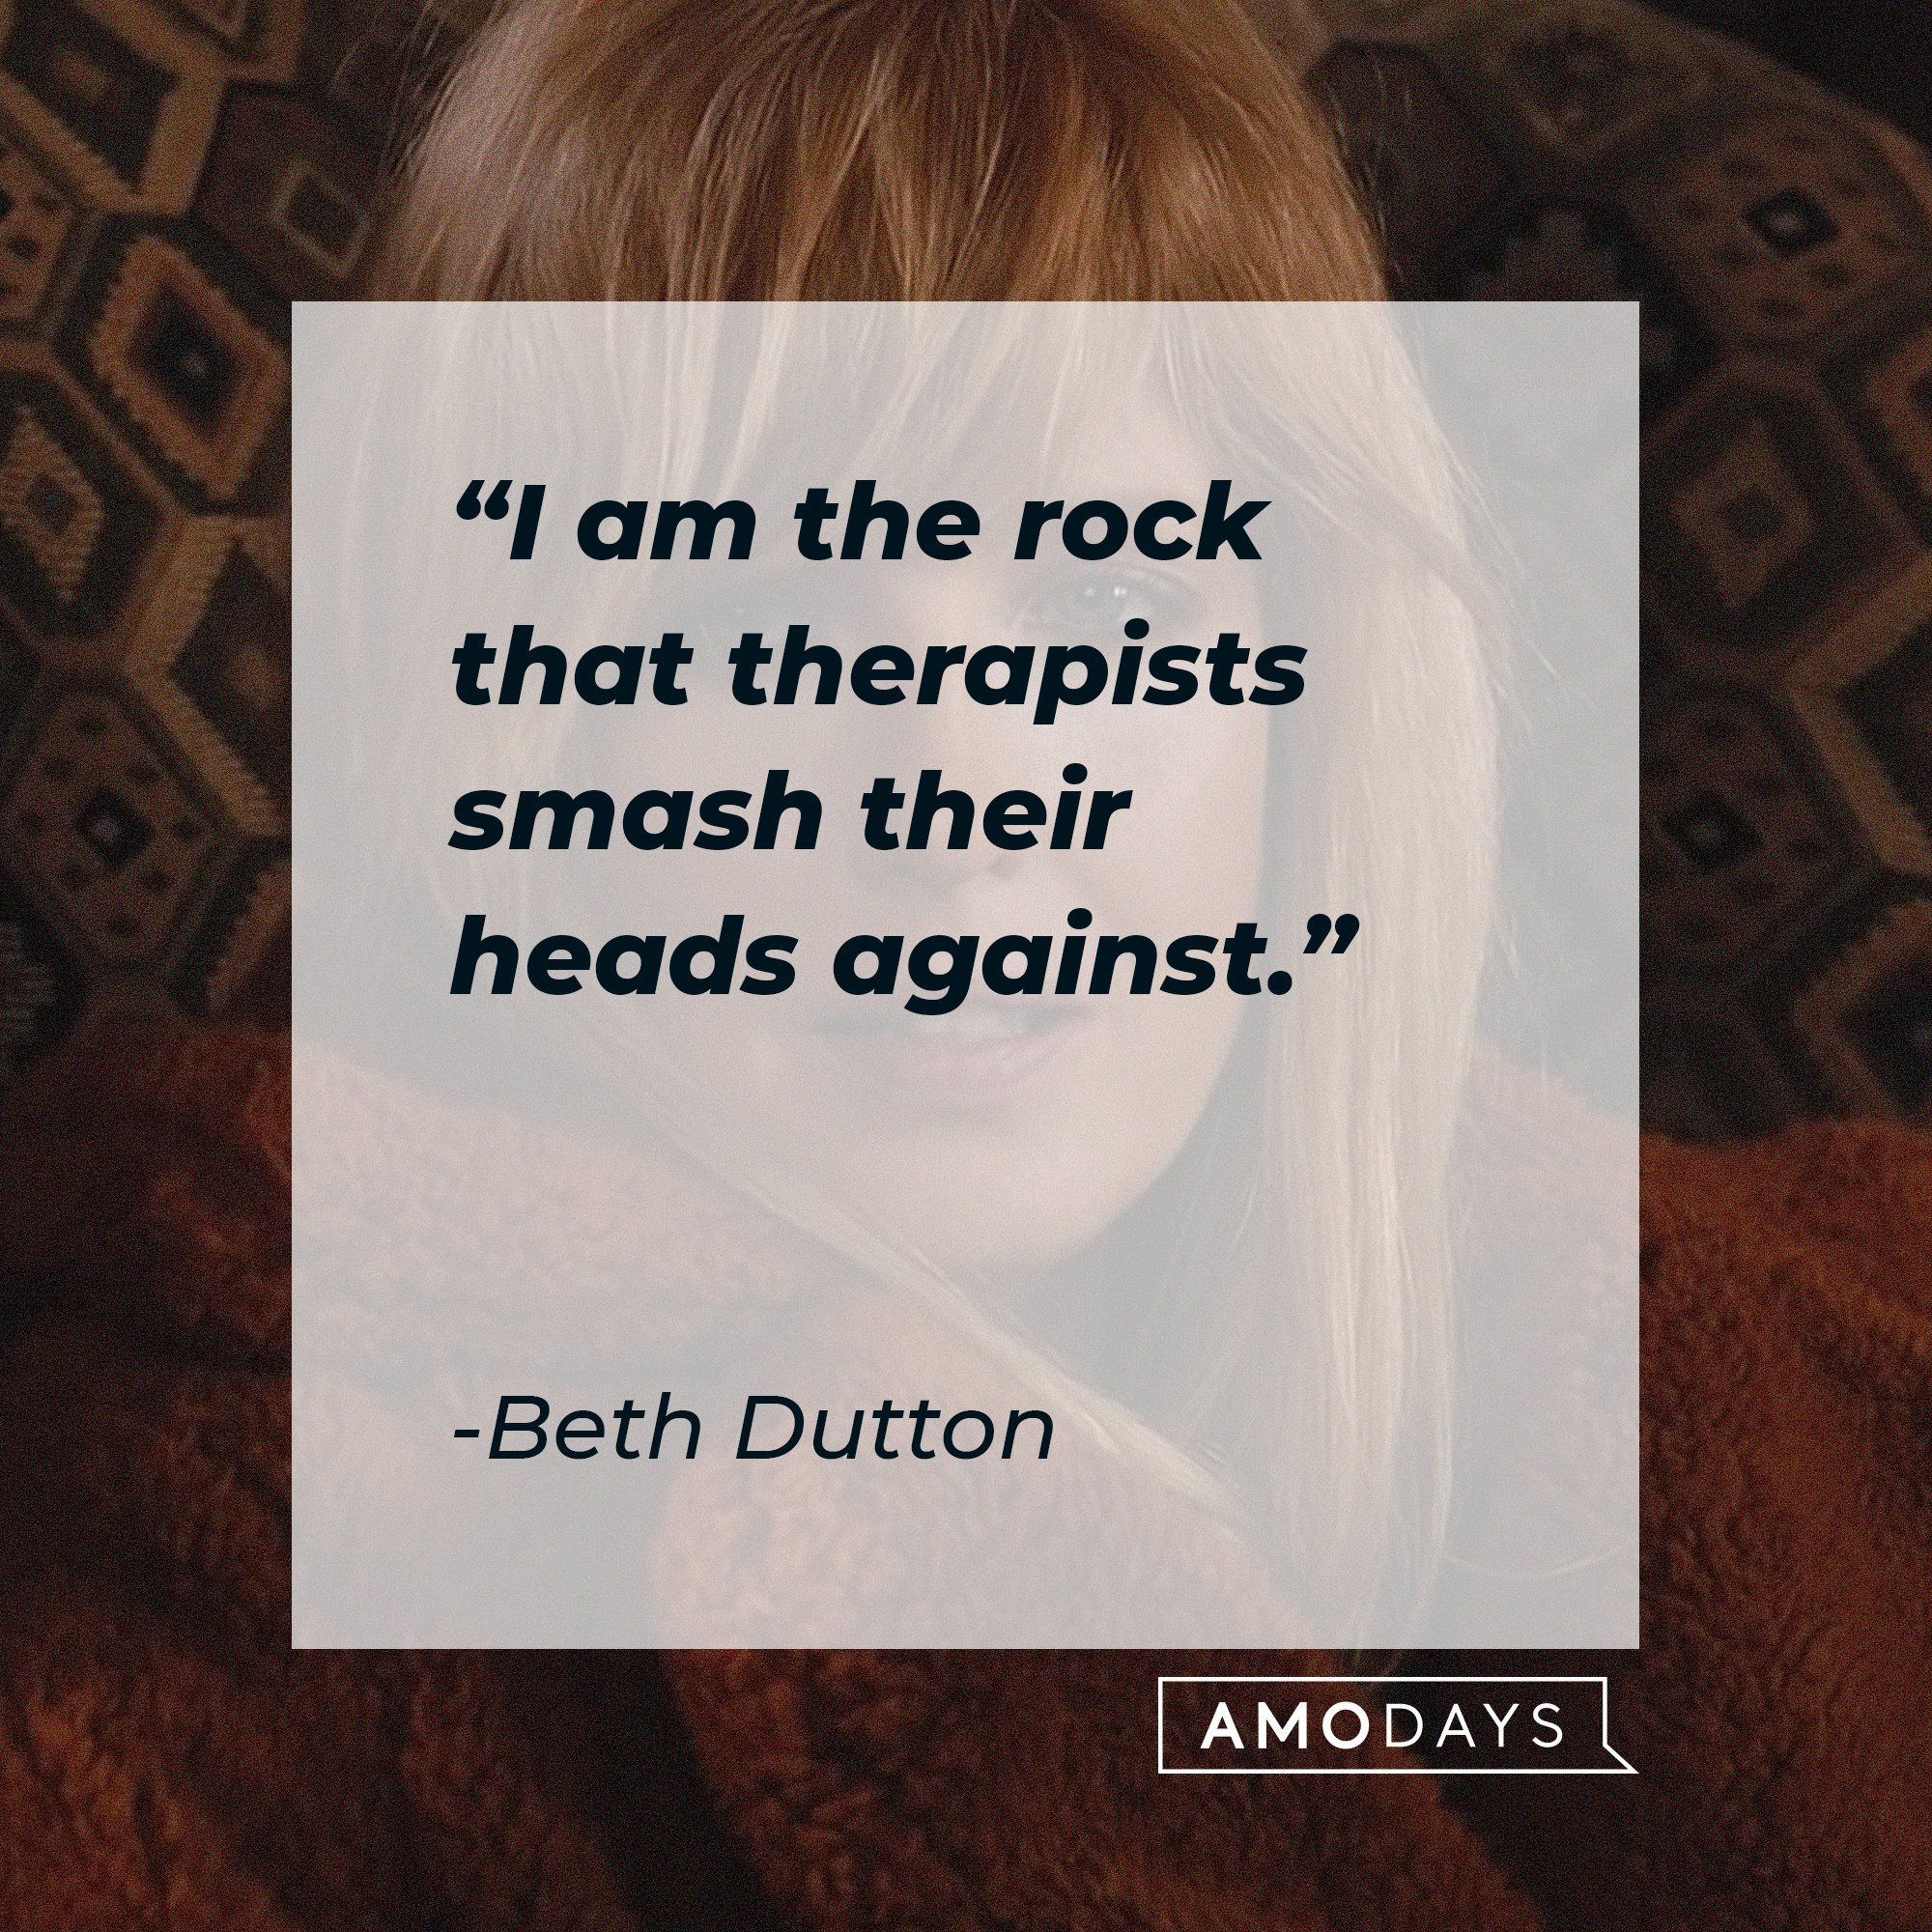  Beth Dutton's quote: "I am the rock that therapists smash their heads against." | Source: AmoDays